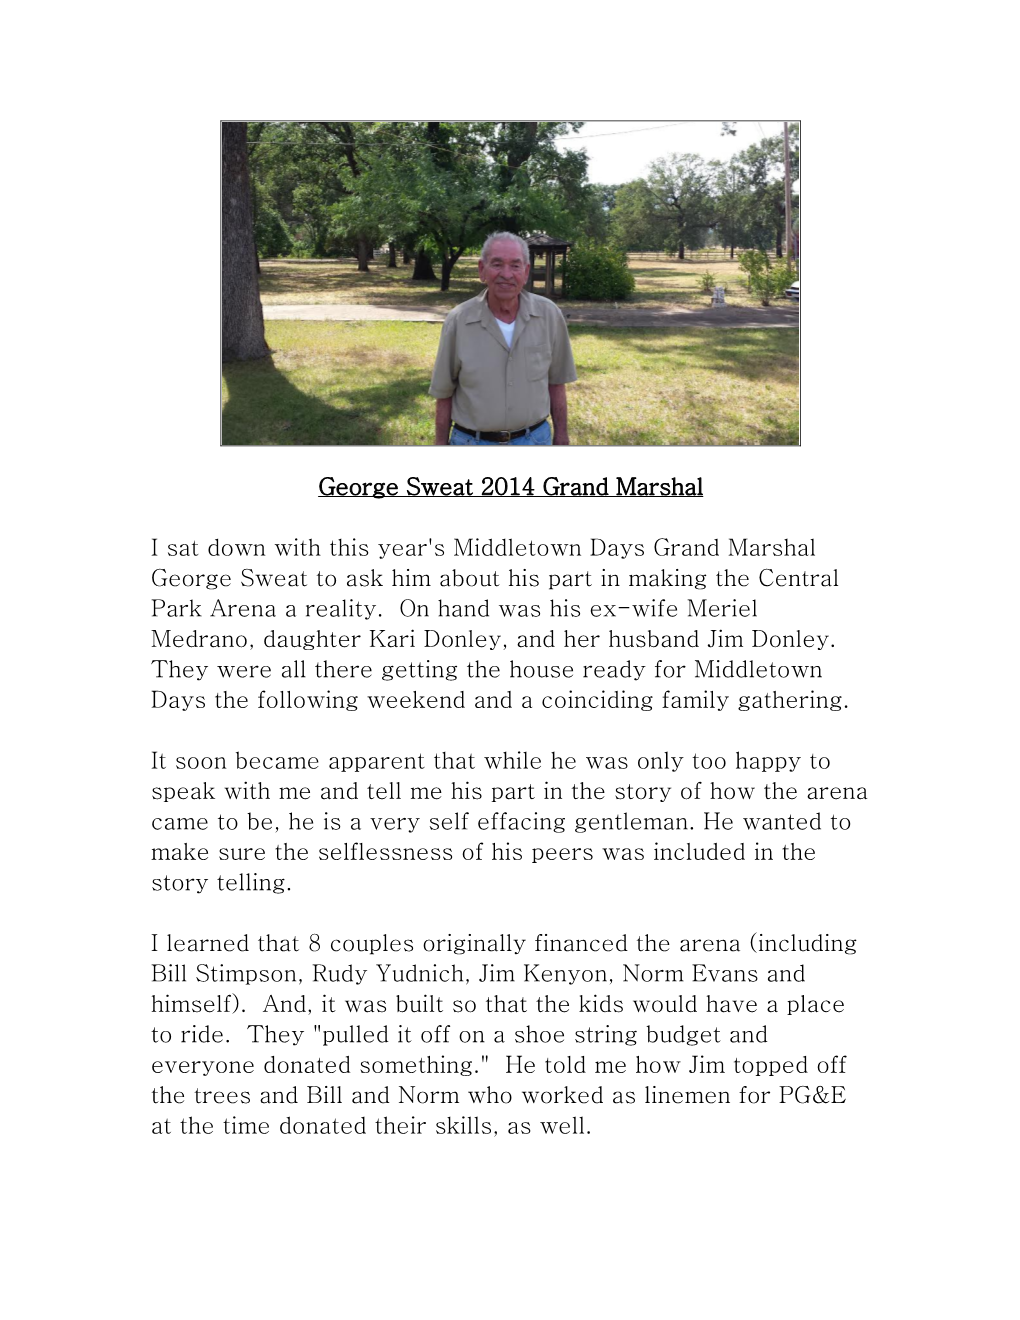 I Sat Down to Write an Article About This Year's Grand Marshall, George Sweat